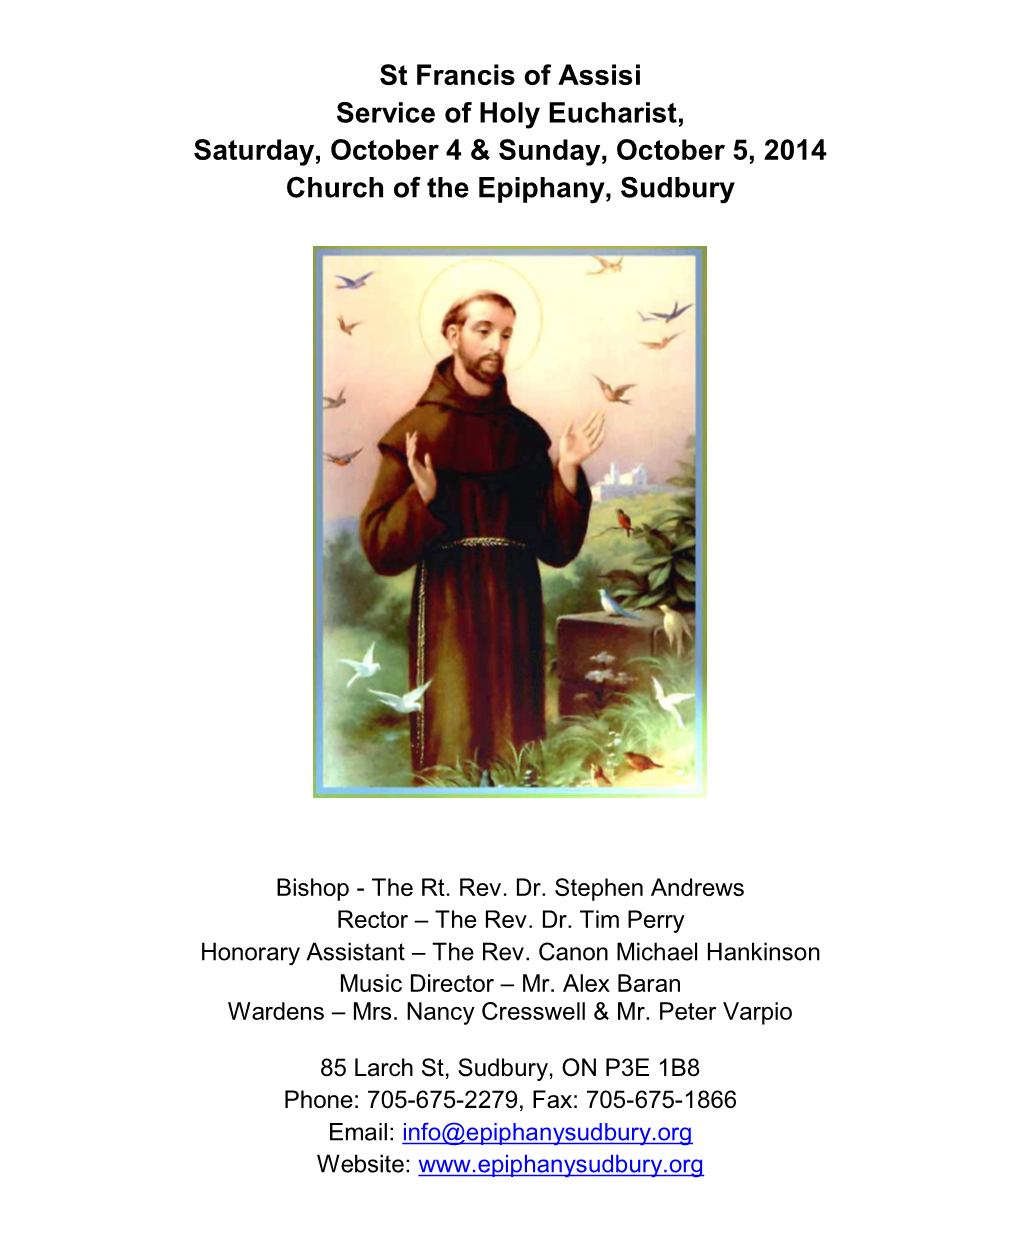 St Francis of Assisi Service of Holy Eucharist, Saturday, October 4 & Sunday, October 5, 2014 Church of the Epiphany, Sudbury